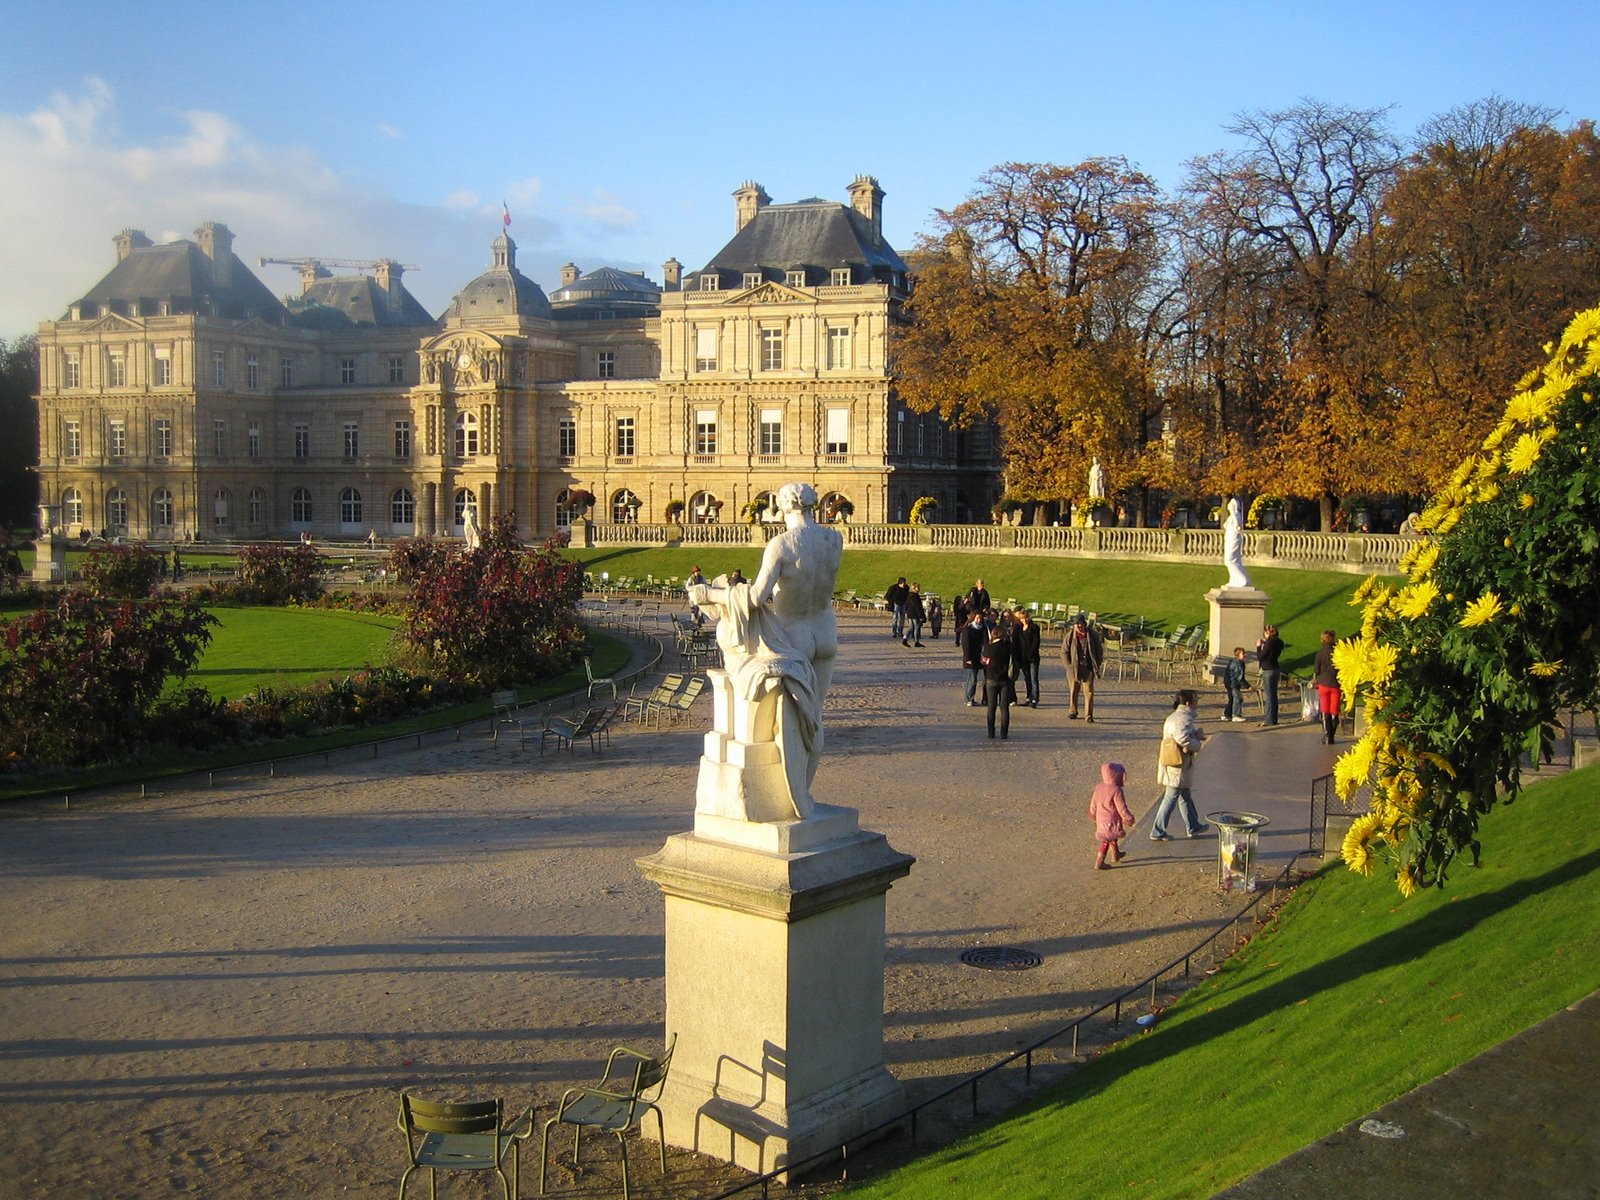 Luxembourg Gardens, late October